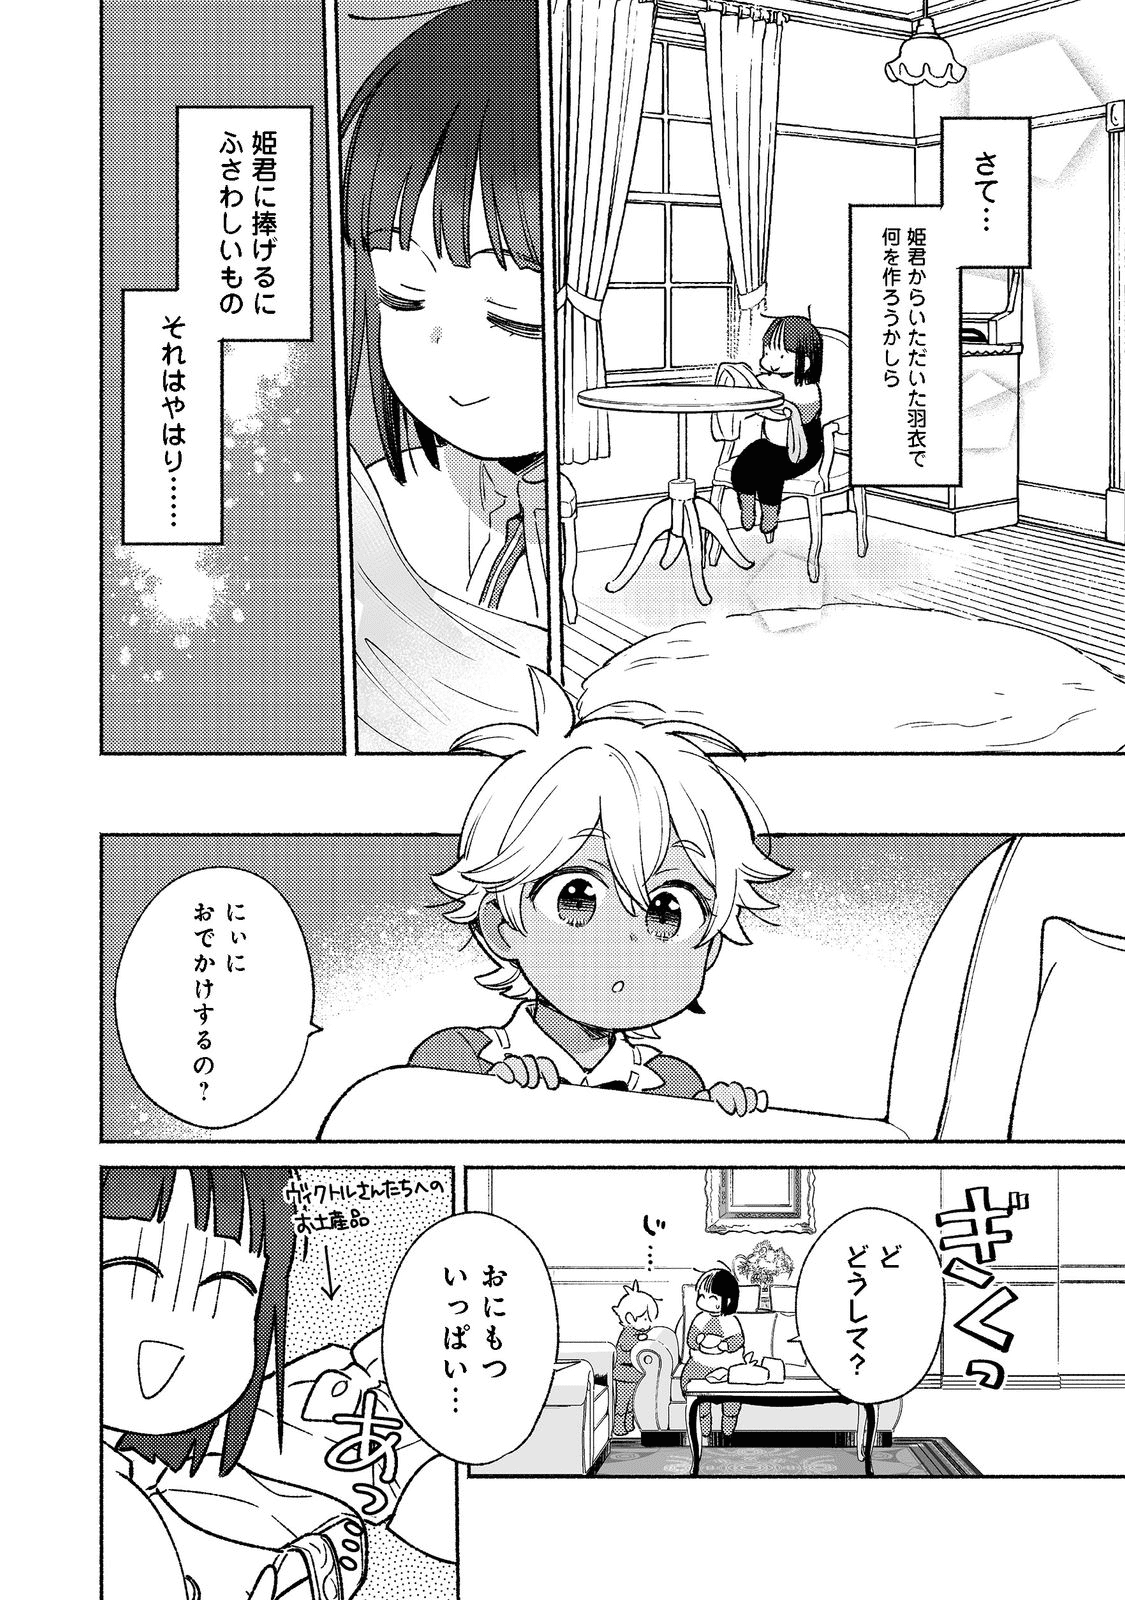 I’m the White Pig Nobleman 第14.2話 - Page 6